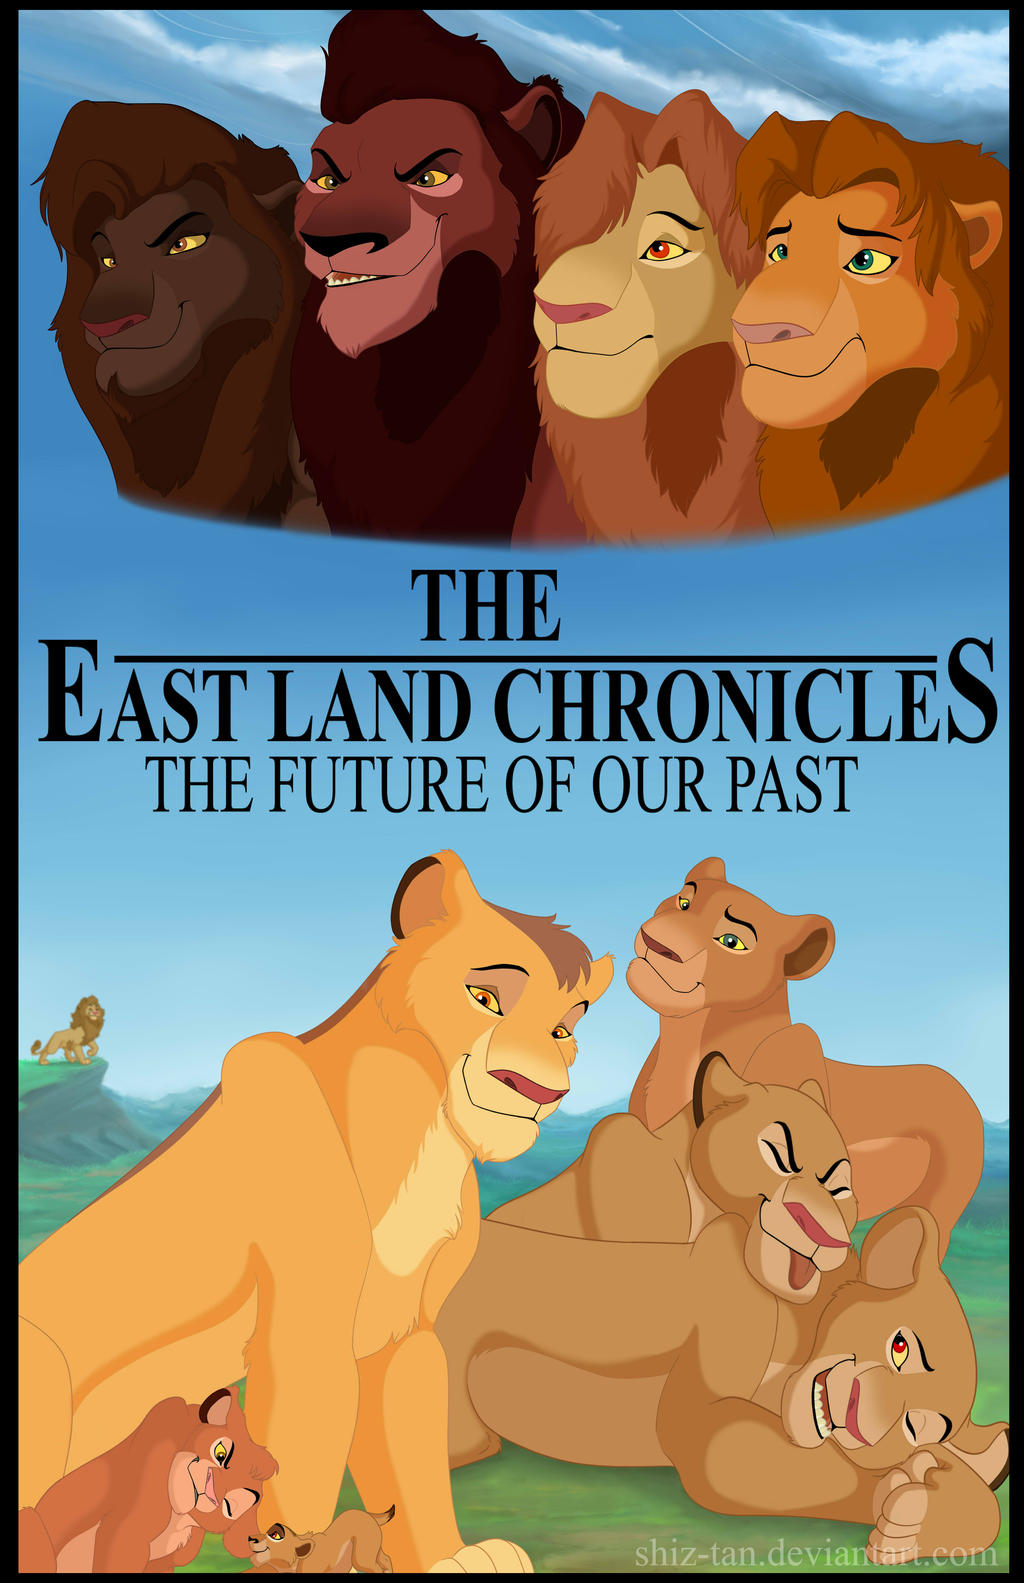 The Future of Our Past, The East Land Chronicles